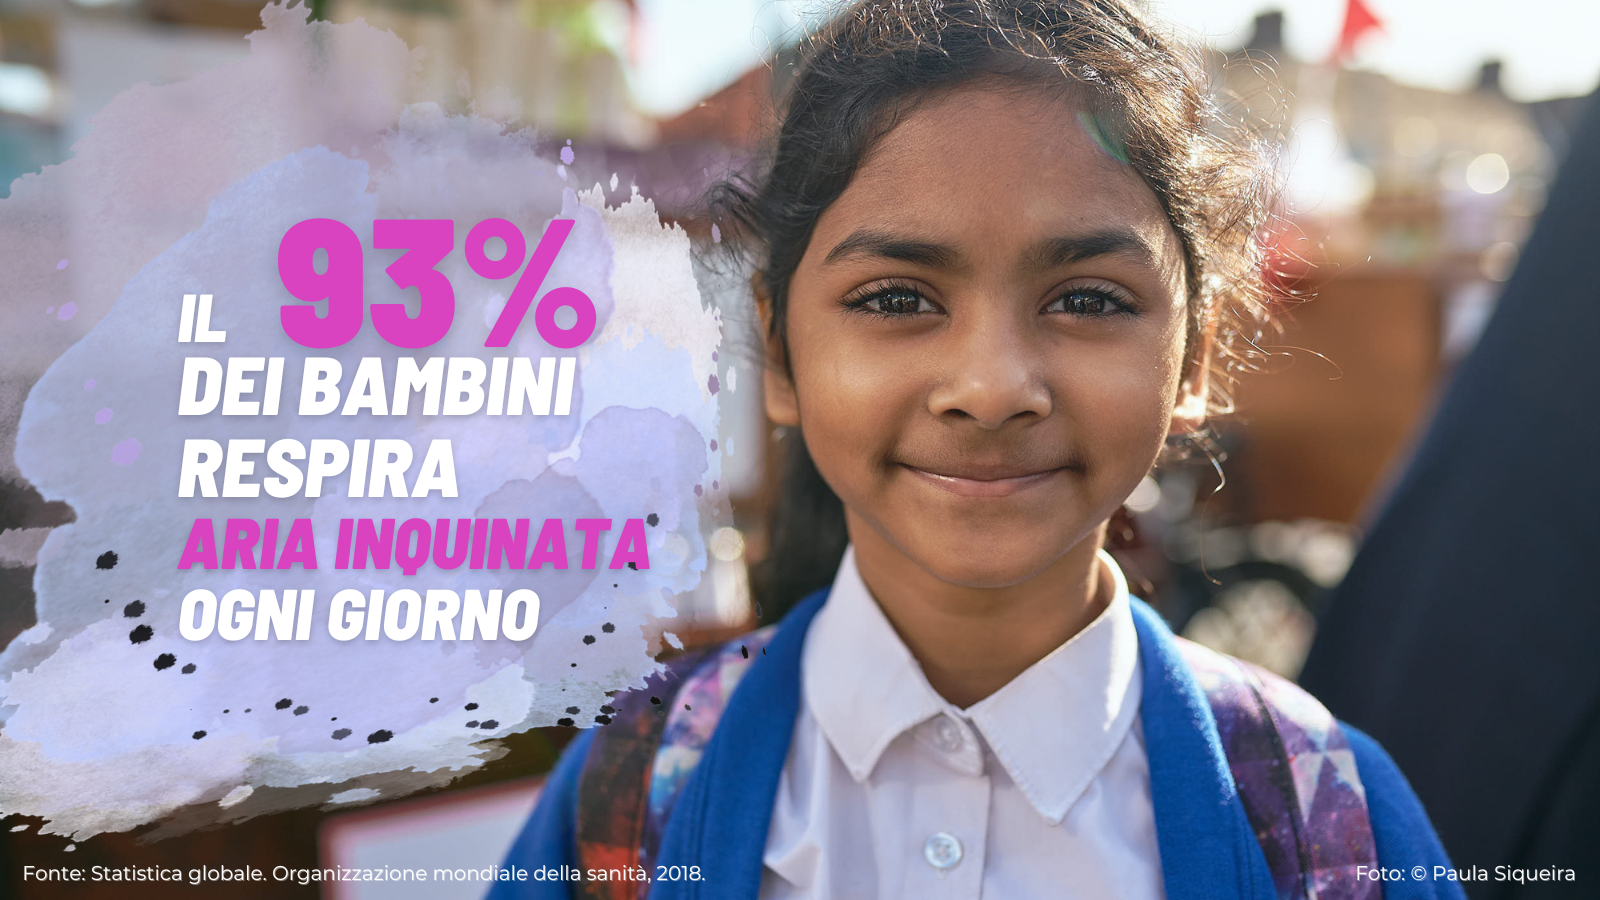 photo of school girl + stat: 93% of children worldwide breathe toxic air each day